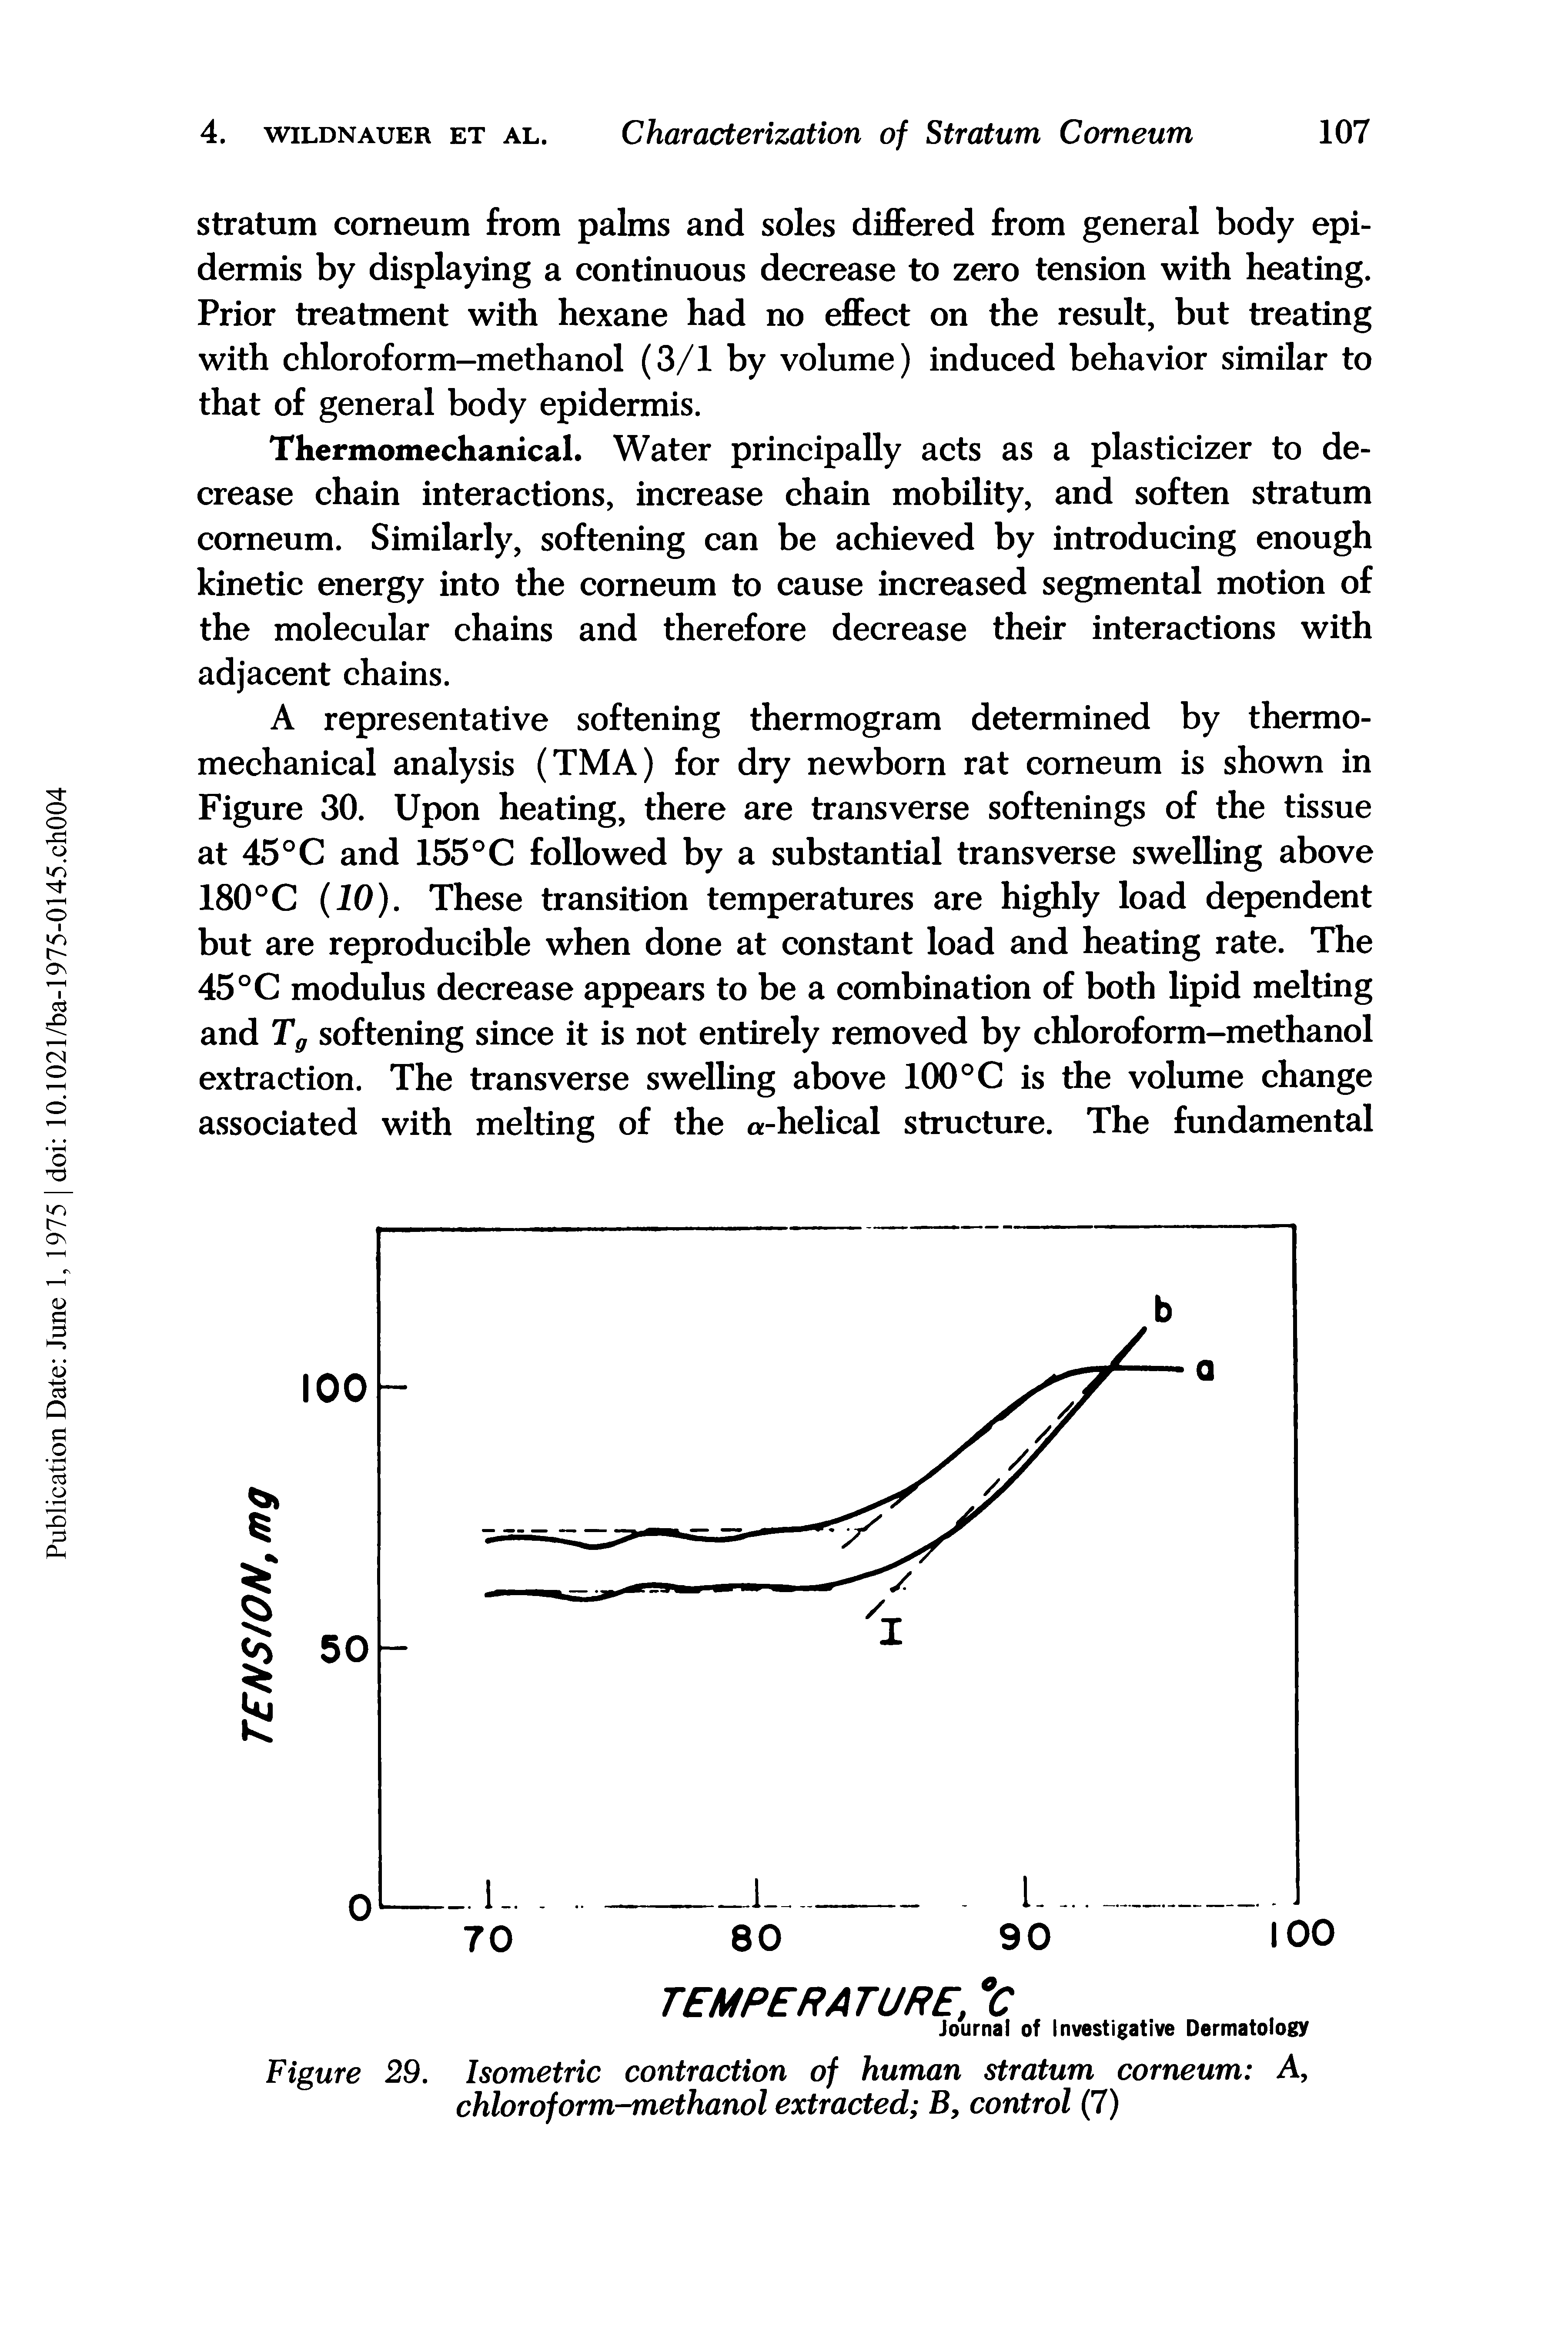 Figure 29. Isometric contraction of human stratum comeum A, chloroform-methanol extracted B, control (7)...